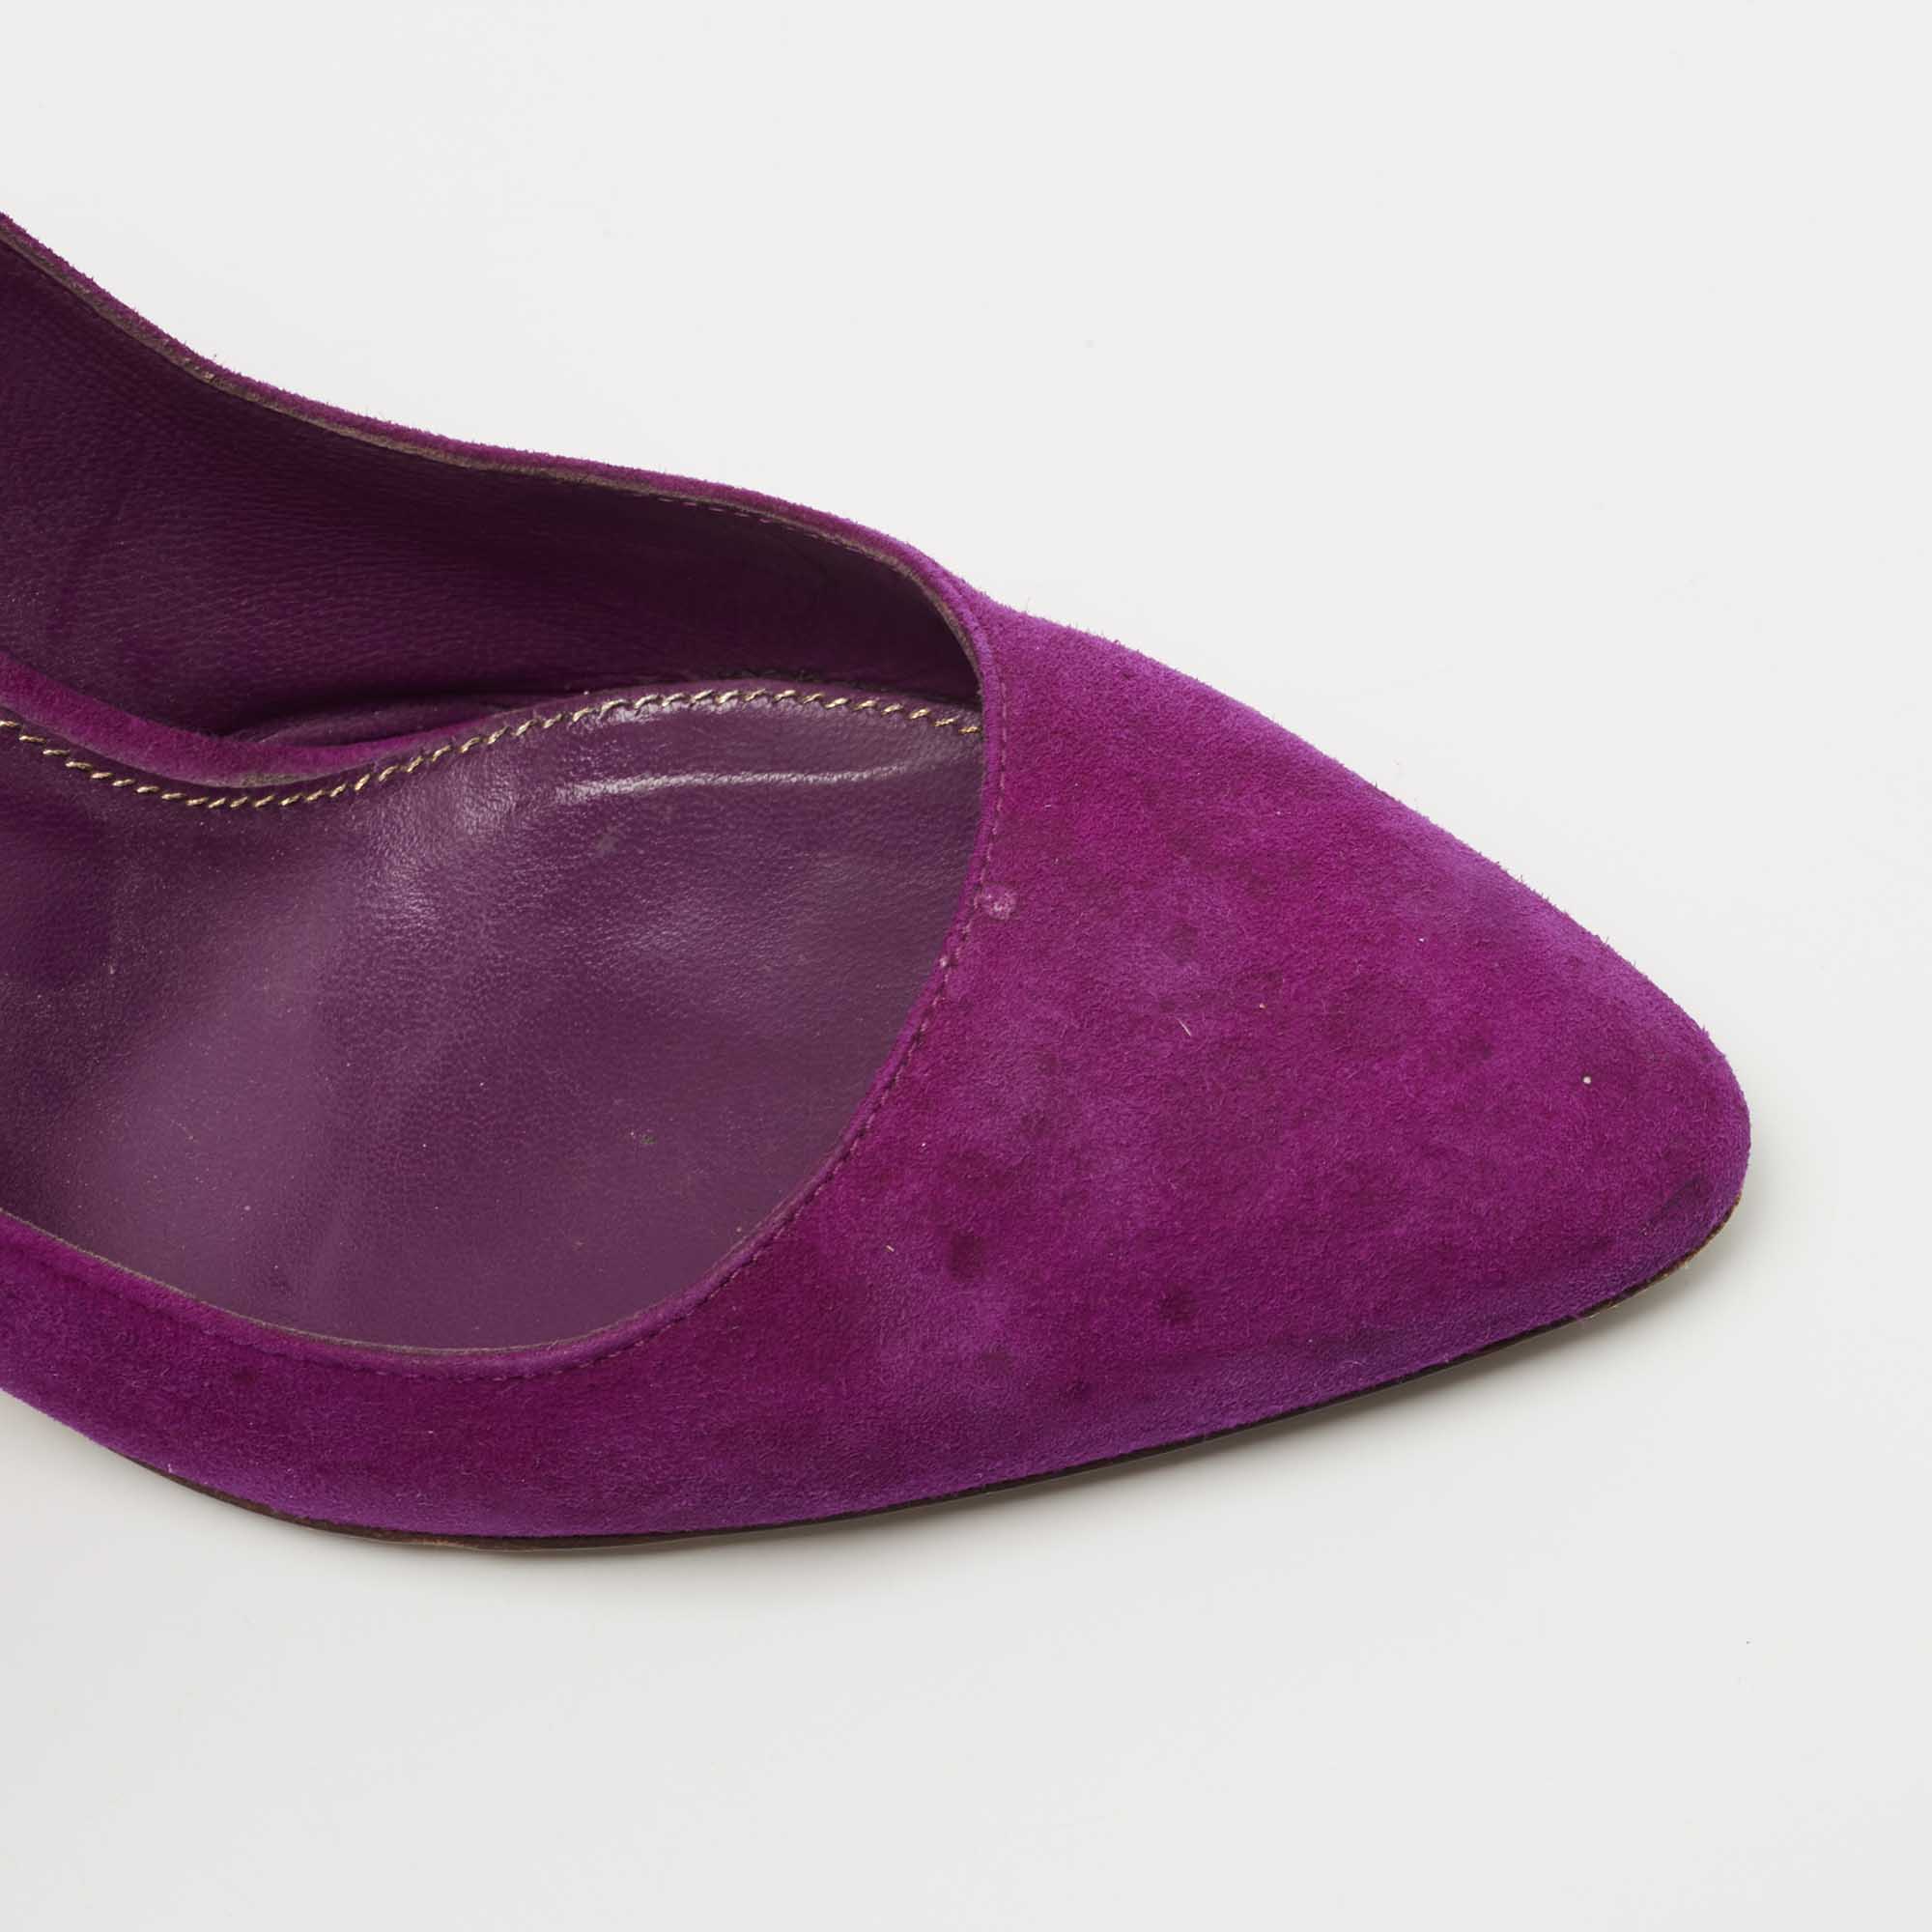 Sergio Rossi Purple Suede Pointed Toe  Pumps Size 38